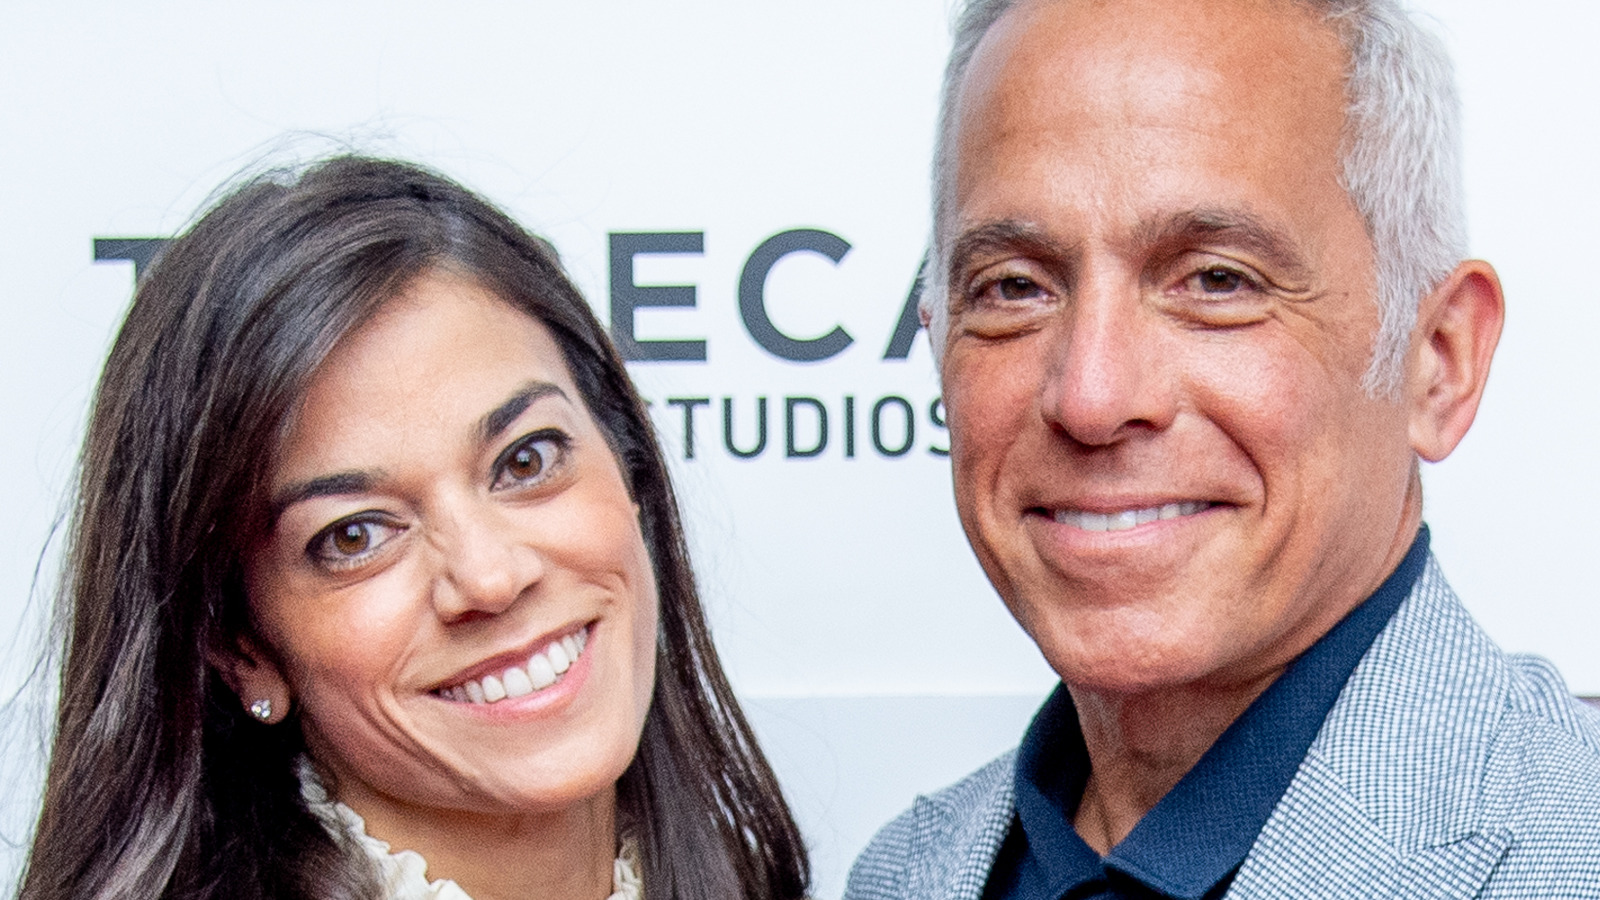 https://www.mashed.com/img/gallery/geoffrey-zakarian-shared-this-sweet-message-on-his-wedding-anniversary/l-intro-1627657338.jpg